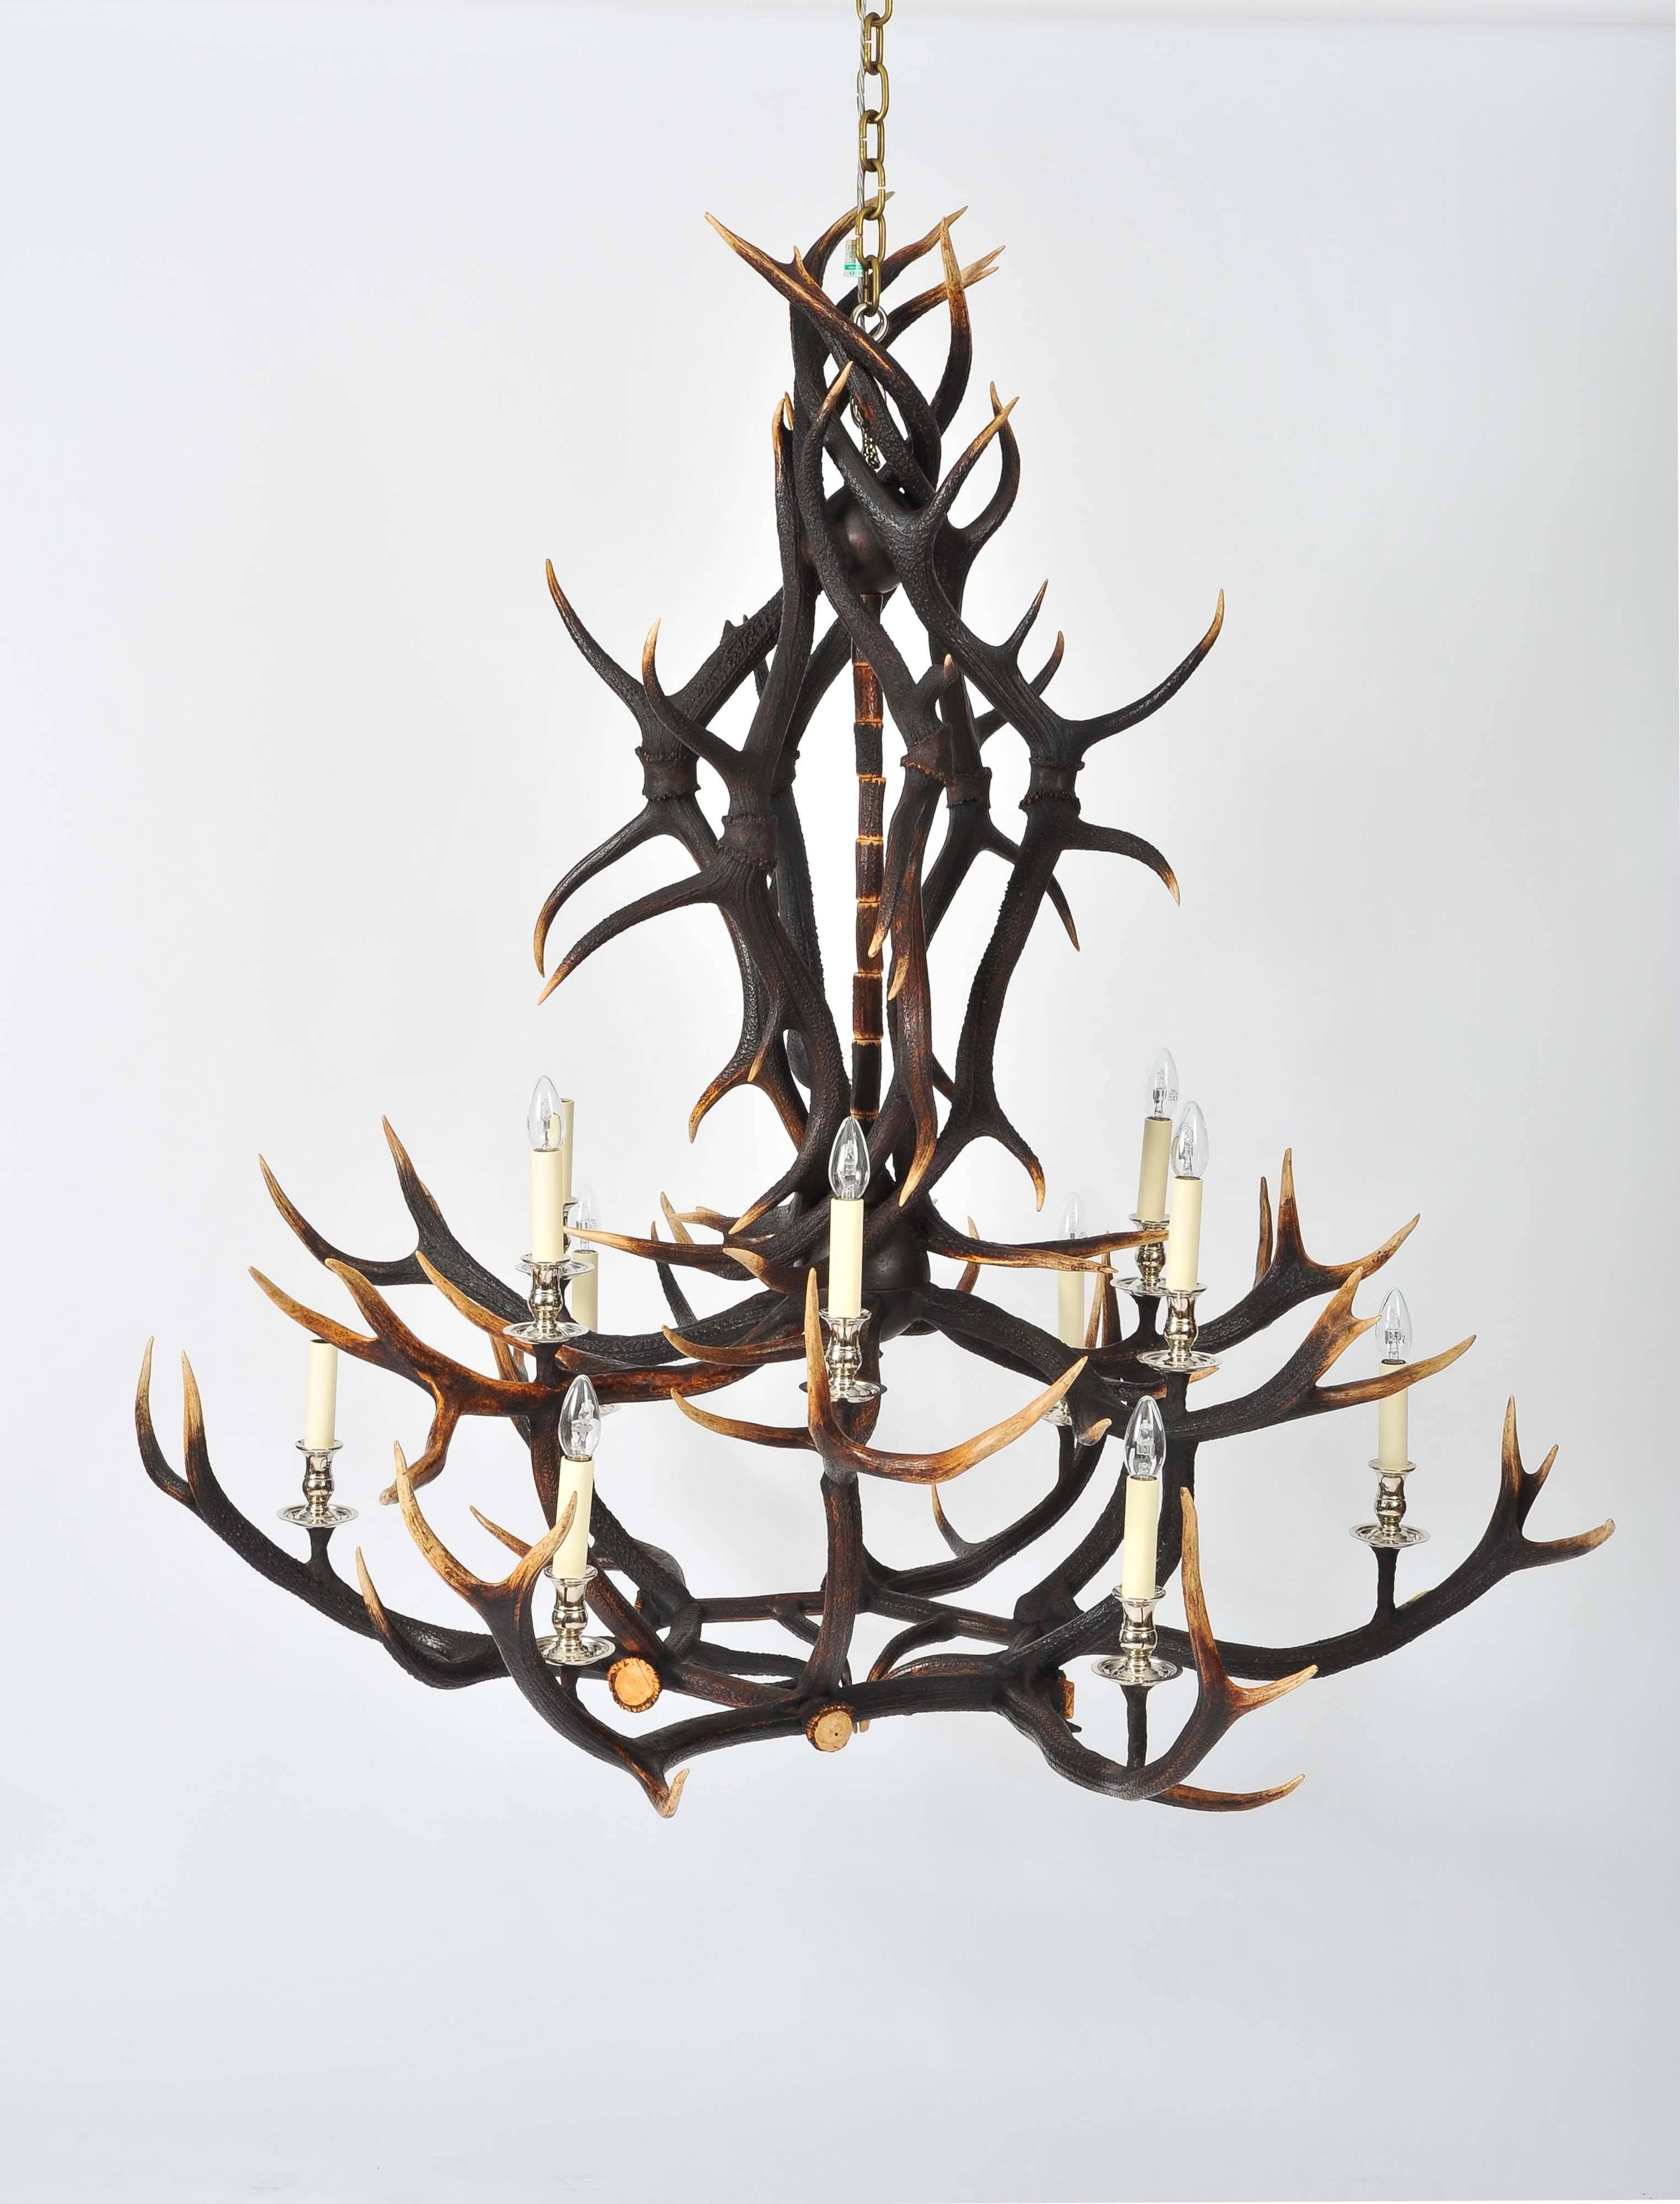 This outstanding antler chandelier was custom designed and made from naturally shed large red deer from Scotland. This unique light features two tiers and 12 candle styled lights with brass hardware. The hardware can also be done in nickel plate, if